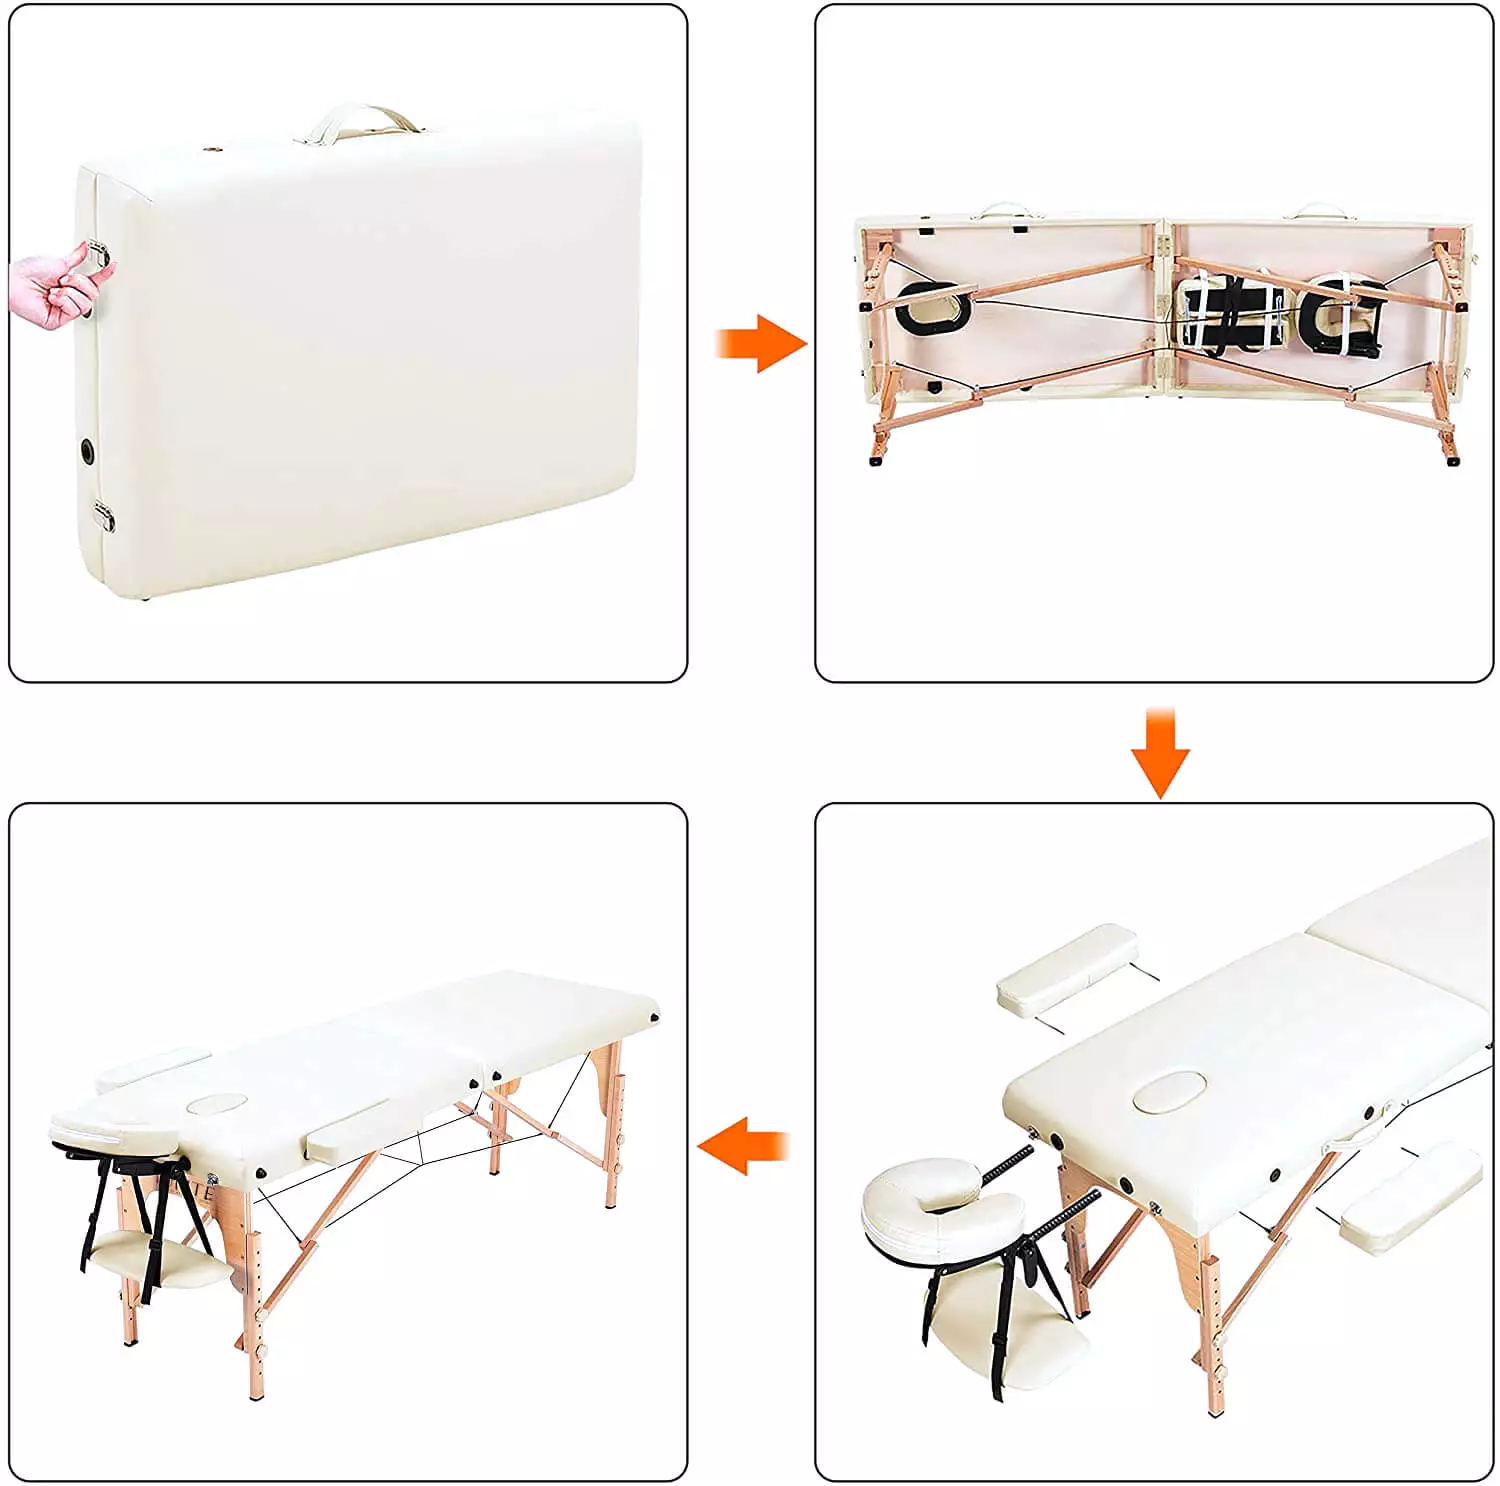 Folding-Beauty-Massage-Bed-_-Portable-Spa-Tables-_-IOLITE-8